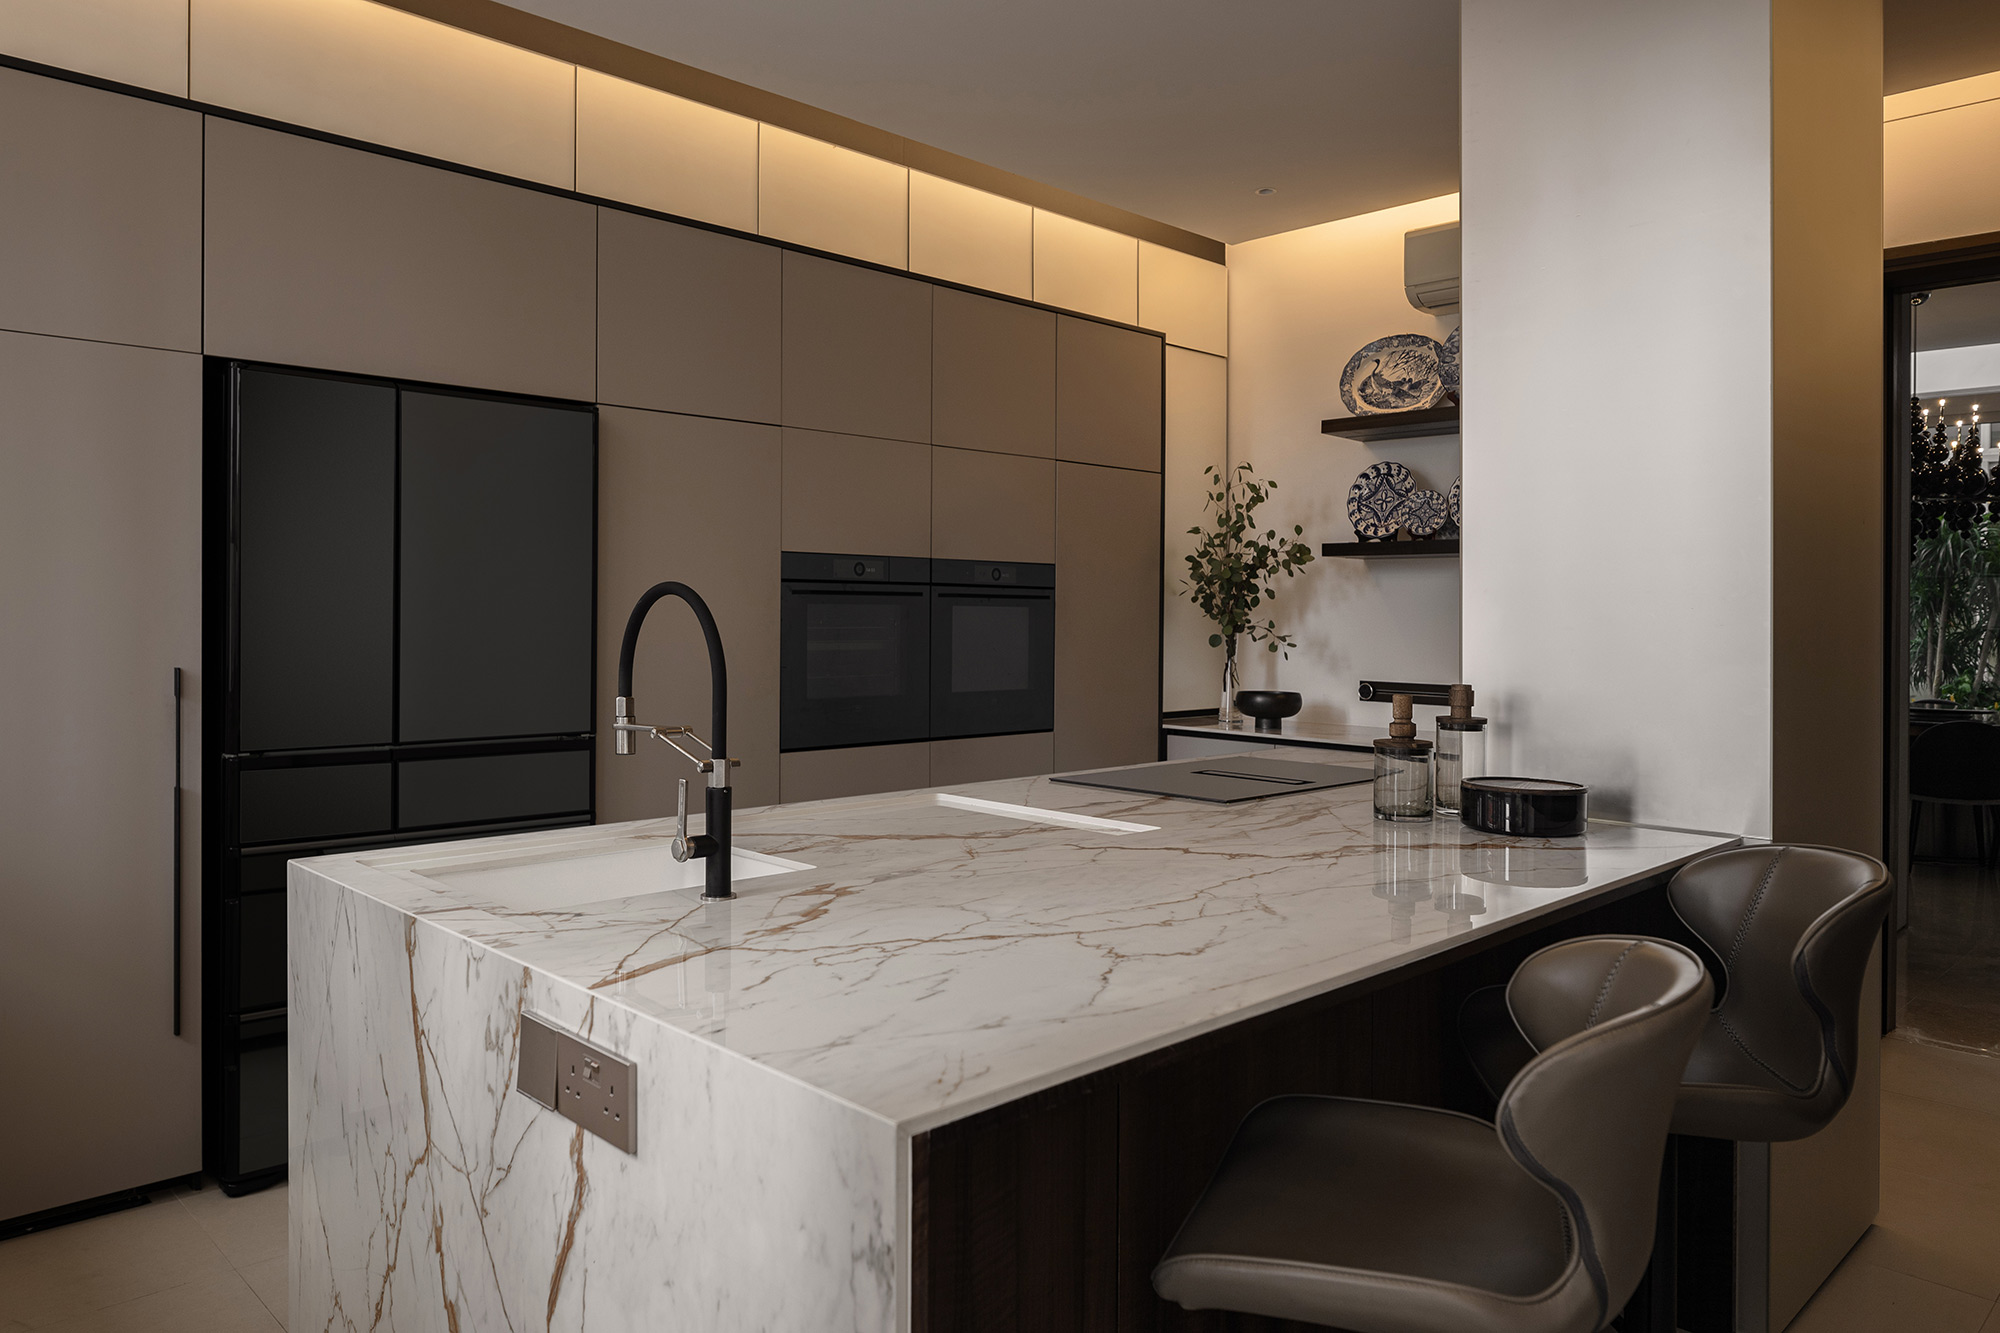 Image of Casa Fernandez Linear Design 4 in Dekton Kira is the star of the kitchen in this Madrid flat that redefines the concept of luxury - Cosentino